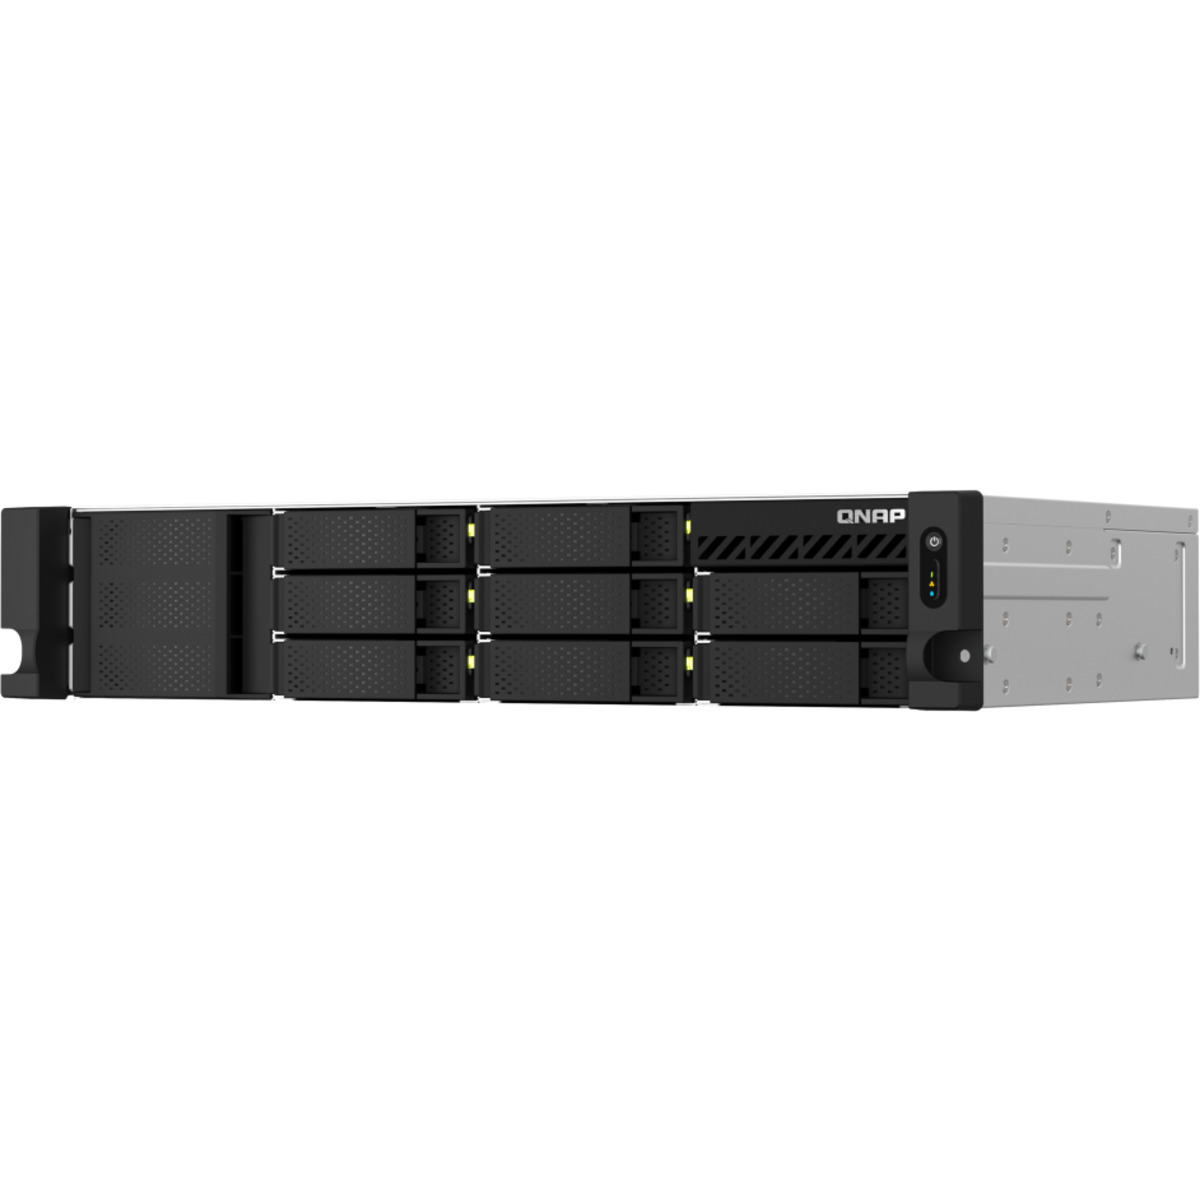 buy QNAP TS-864eU-RP 128tb RackMount NAS - Network Attached Storage Device 8x16000gb Seagate IronWolf Pro ST16000NT001 3.5 7200rpm SATA 6Gb/s HDD NAS Class Drives Installed - Burn-In Tested - ON SALE - nas headquarters buy network attached storage server device das new raid-5 free shipping usa spring sale TS-864eU-RP